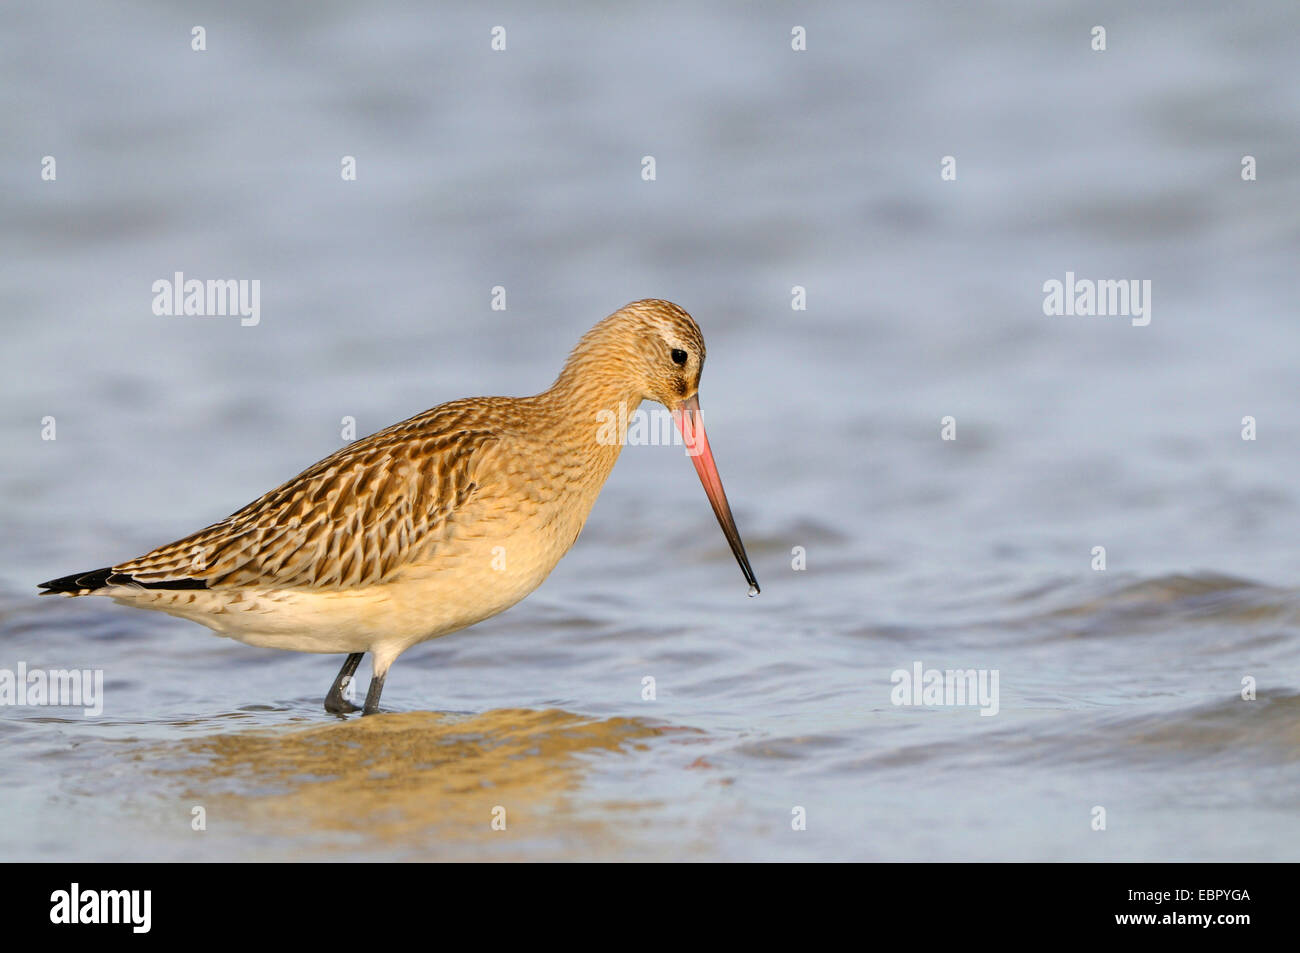 bar-tailed godwit (Limosa lapponica), on the feed in the surf of the Baltic Sea, Germany, Mecklenburg-Western Pomerania, Western Pomerania Lagoon Area National Park Stock Photo